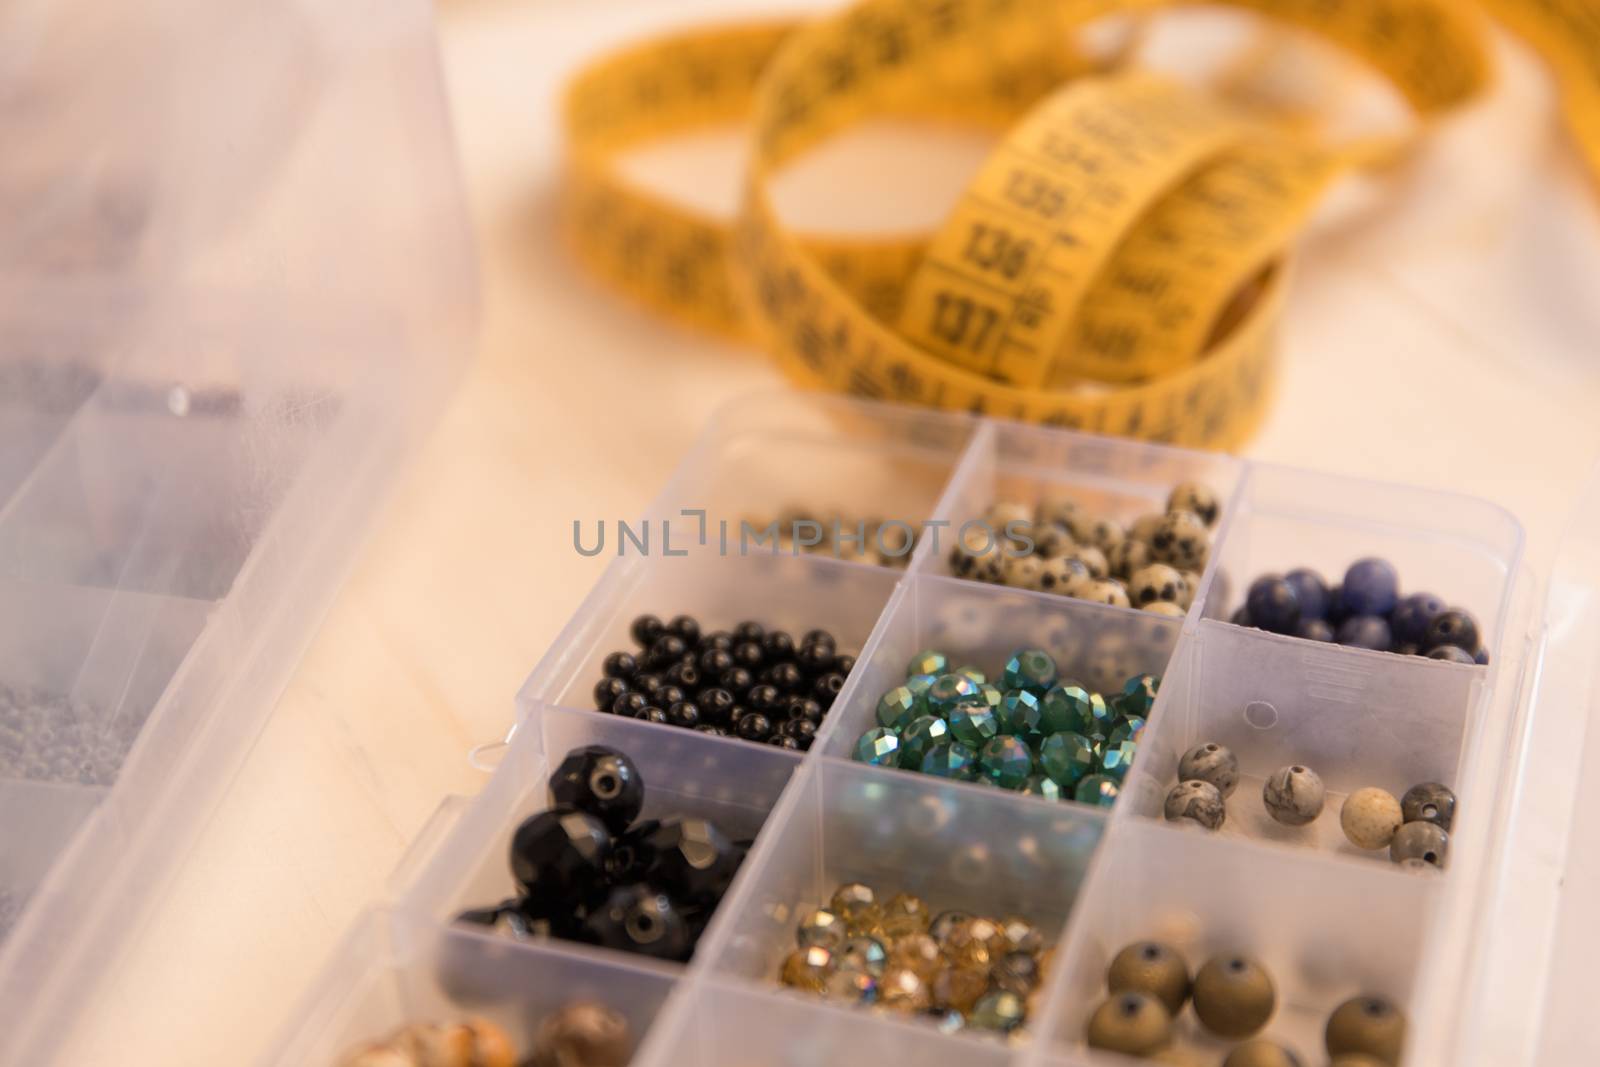 Work from home lifestyle concept: close-up detail of an organizer with various colored stone and crystal beads in foreground and a tailor meter in background bokeh effect on light wooden table